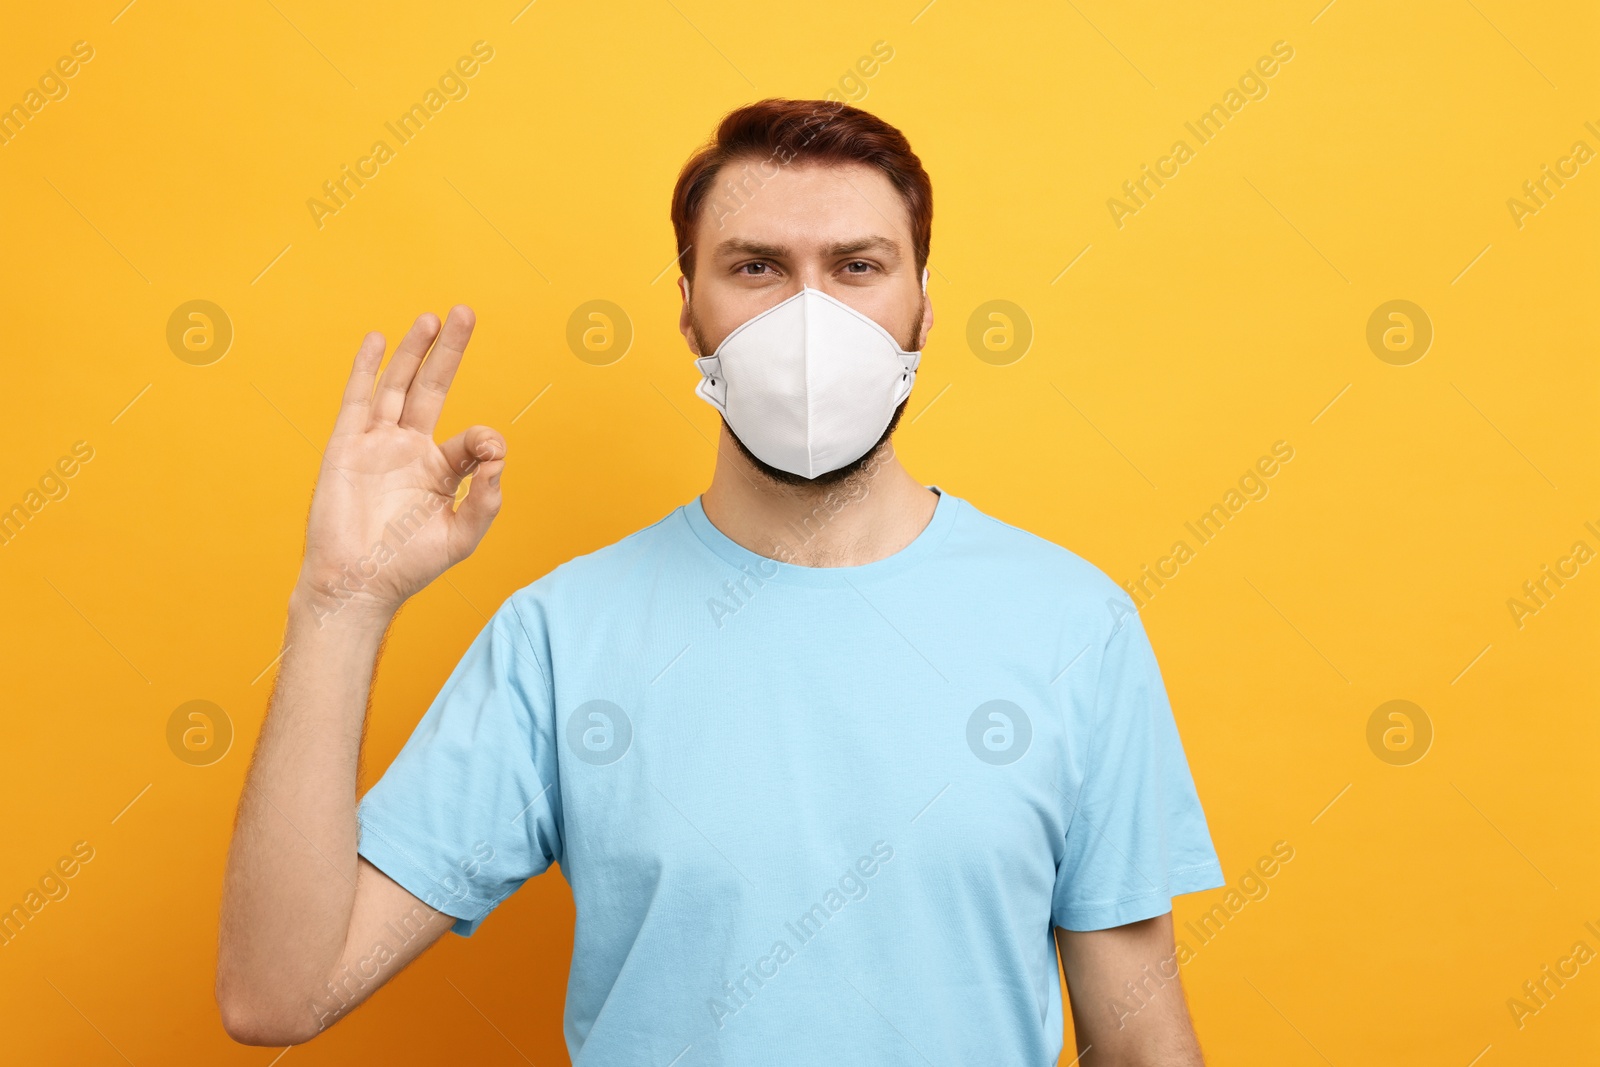 Photo of Man in respirator mask showing OK gesture on yellow background